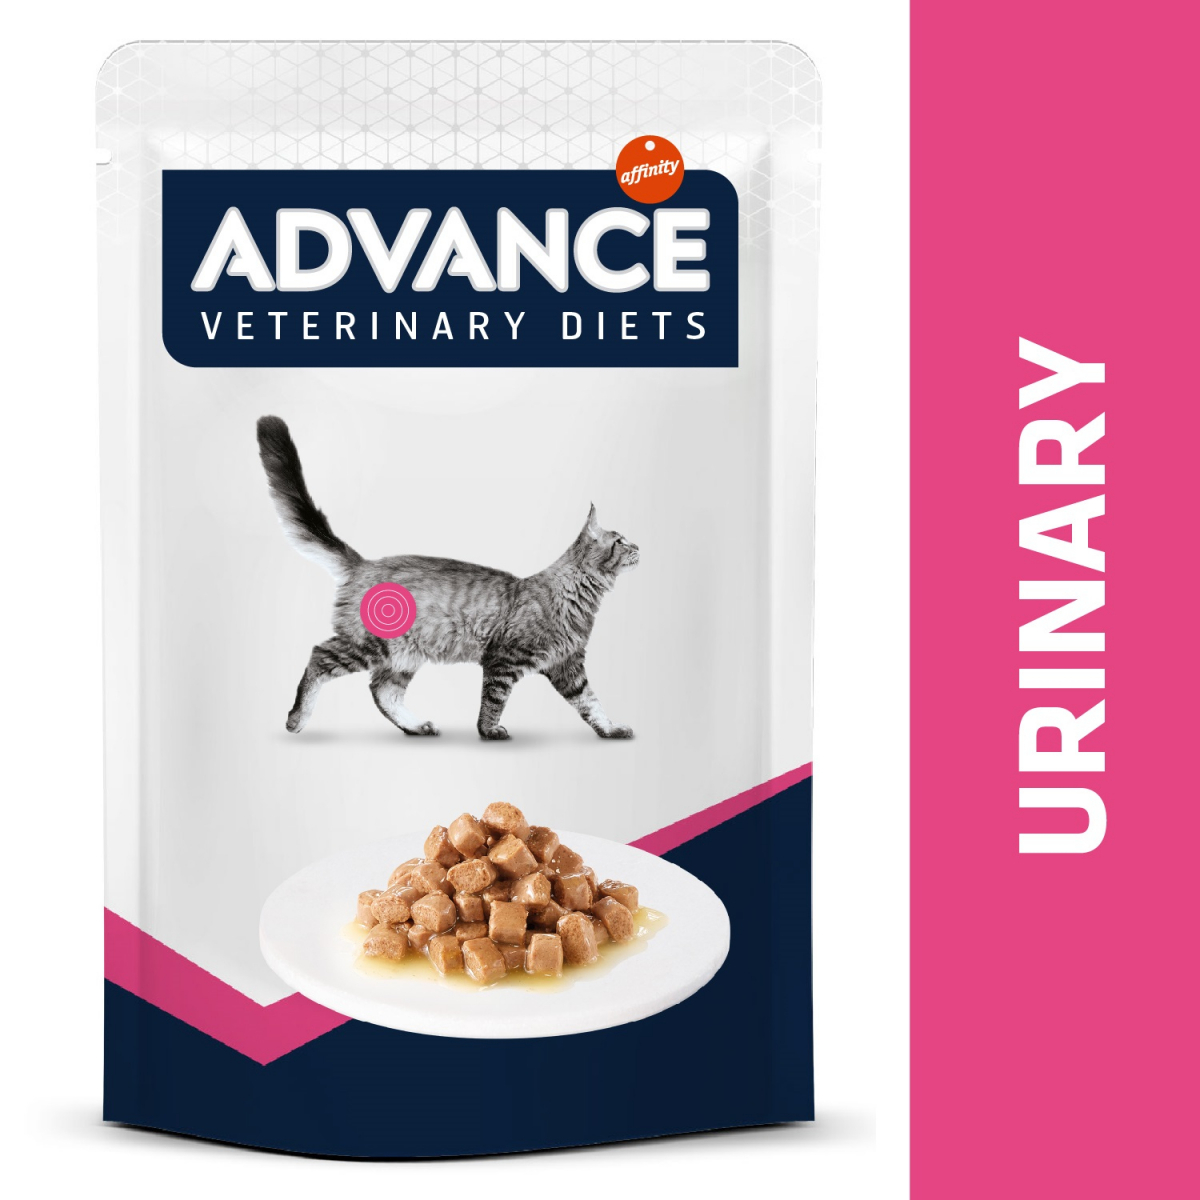 Sachets repas chat PRO PLAN Veterinary Diets UR St/Ox Urinary 